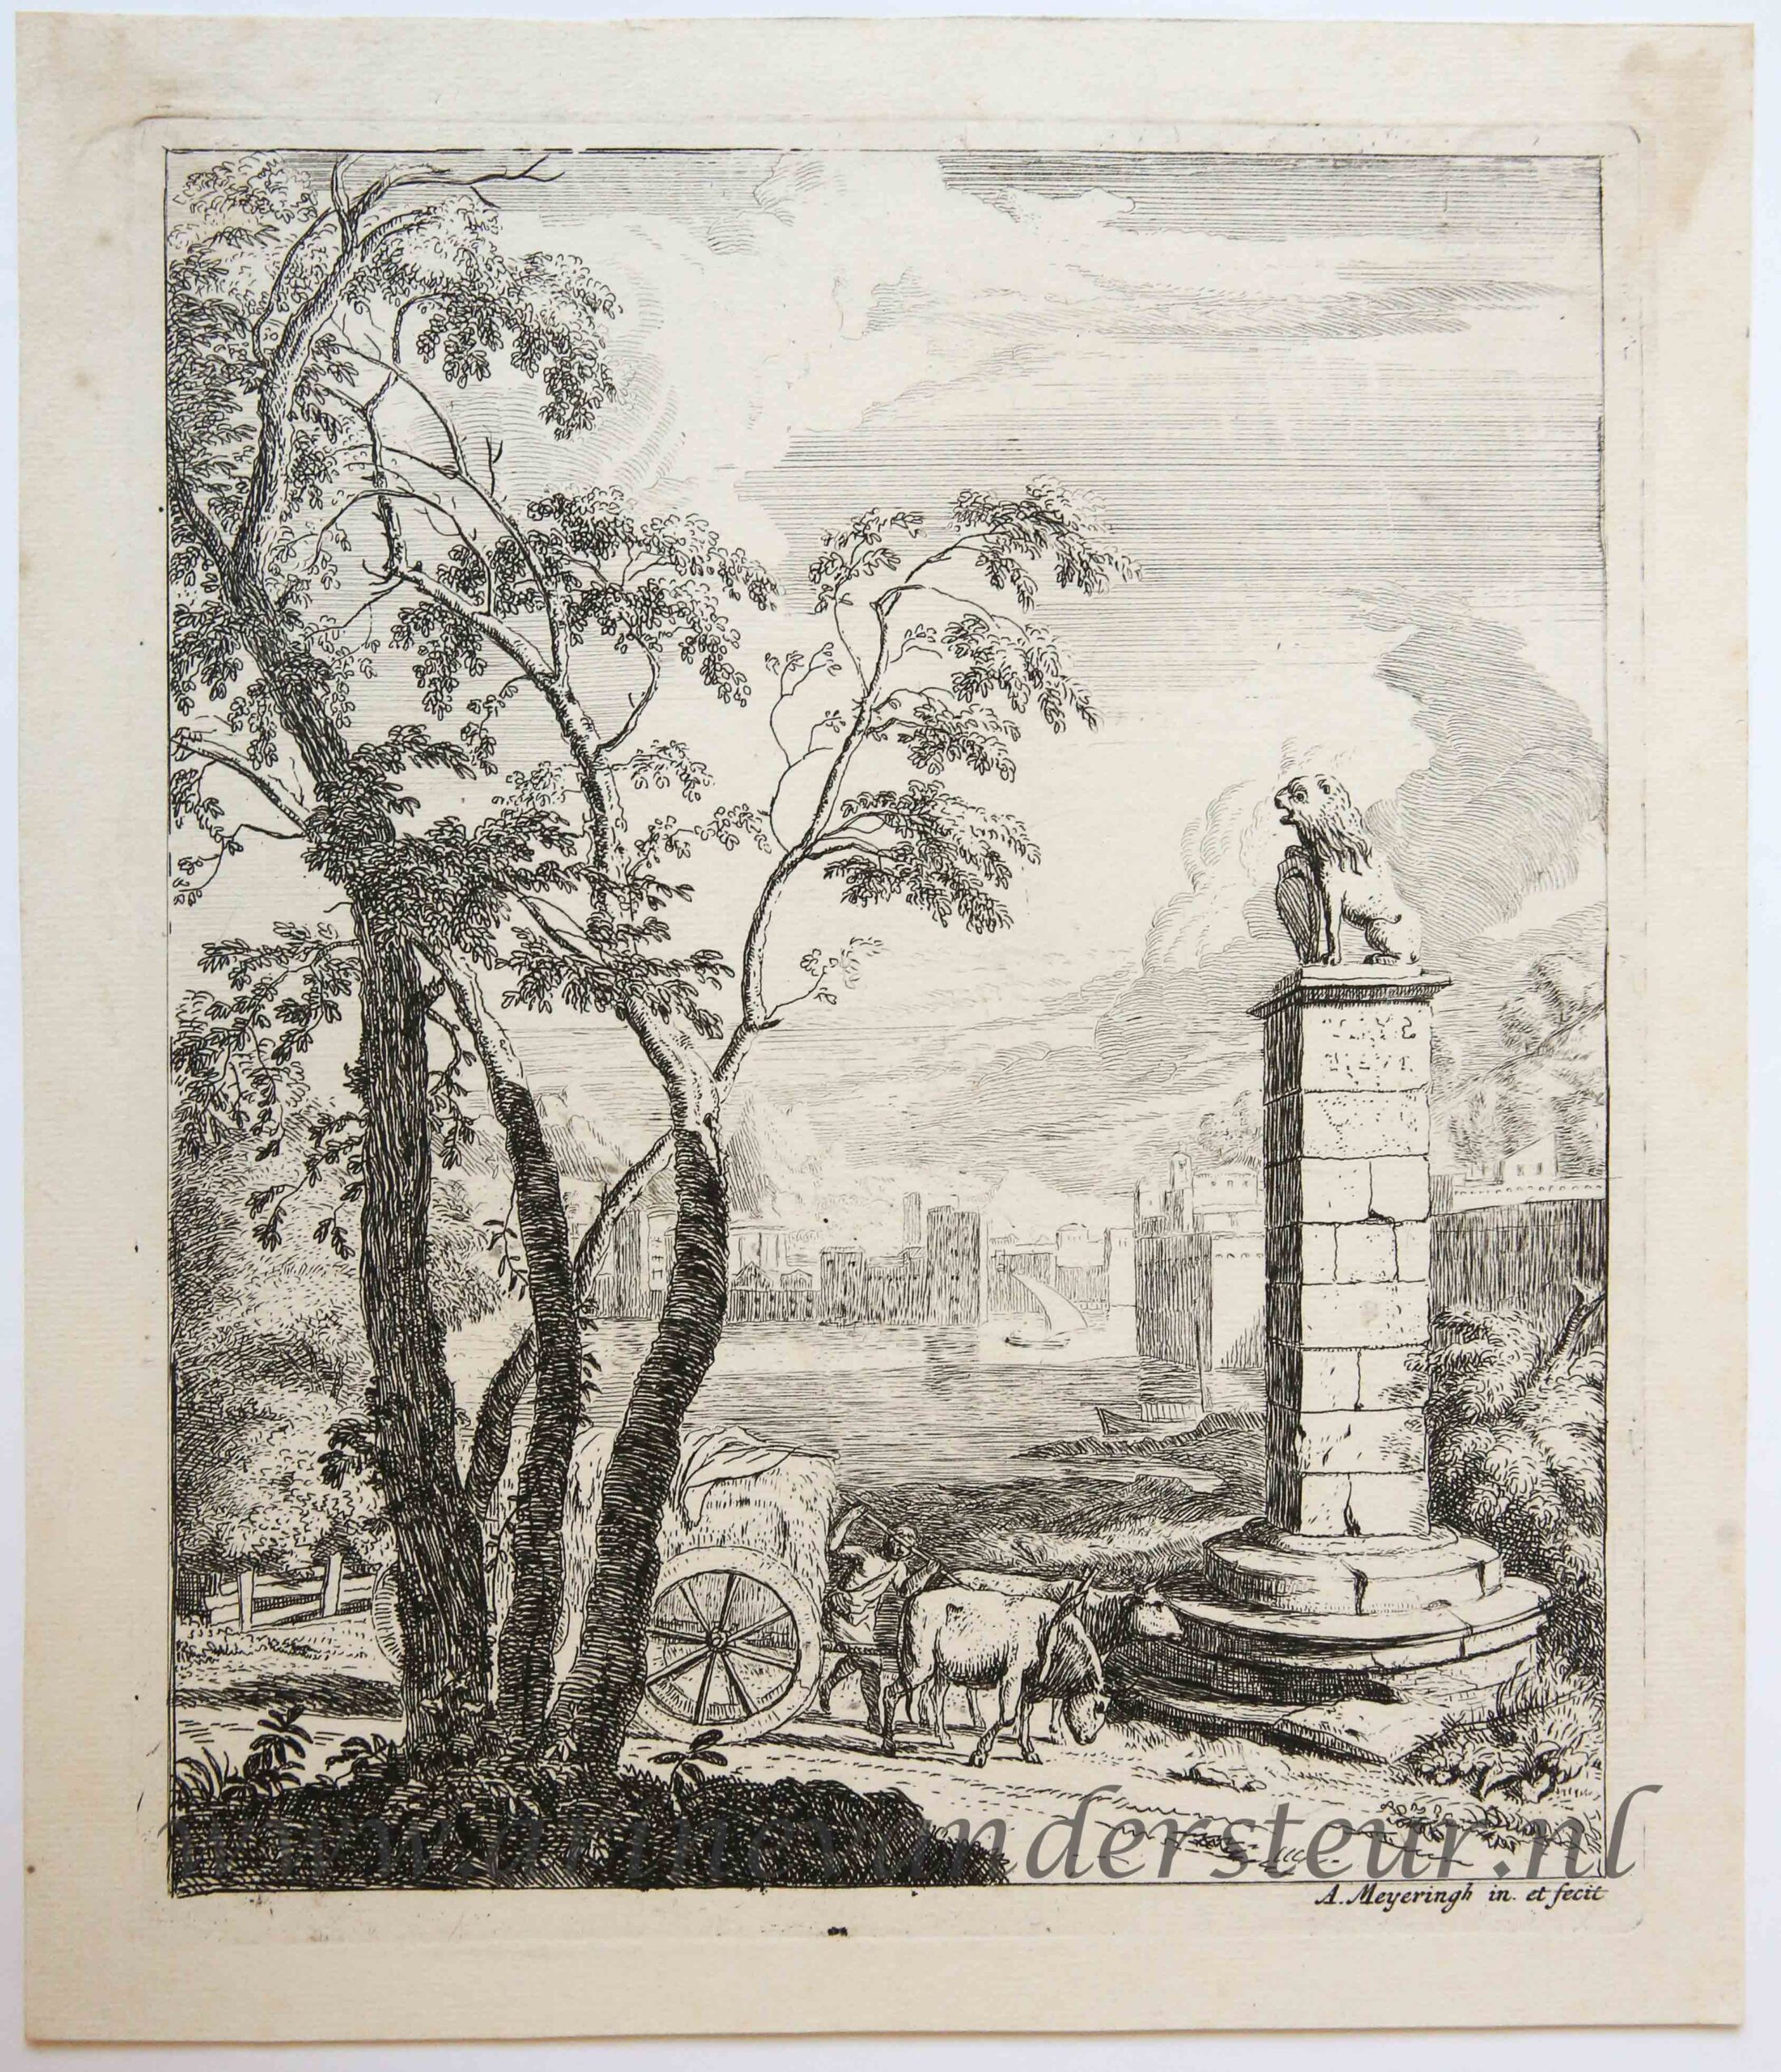 [Antique print, etching and engraving] Landscape with a cart and a monument/Landschap met wagen en monument, published ca. 1695-1714.